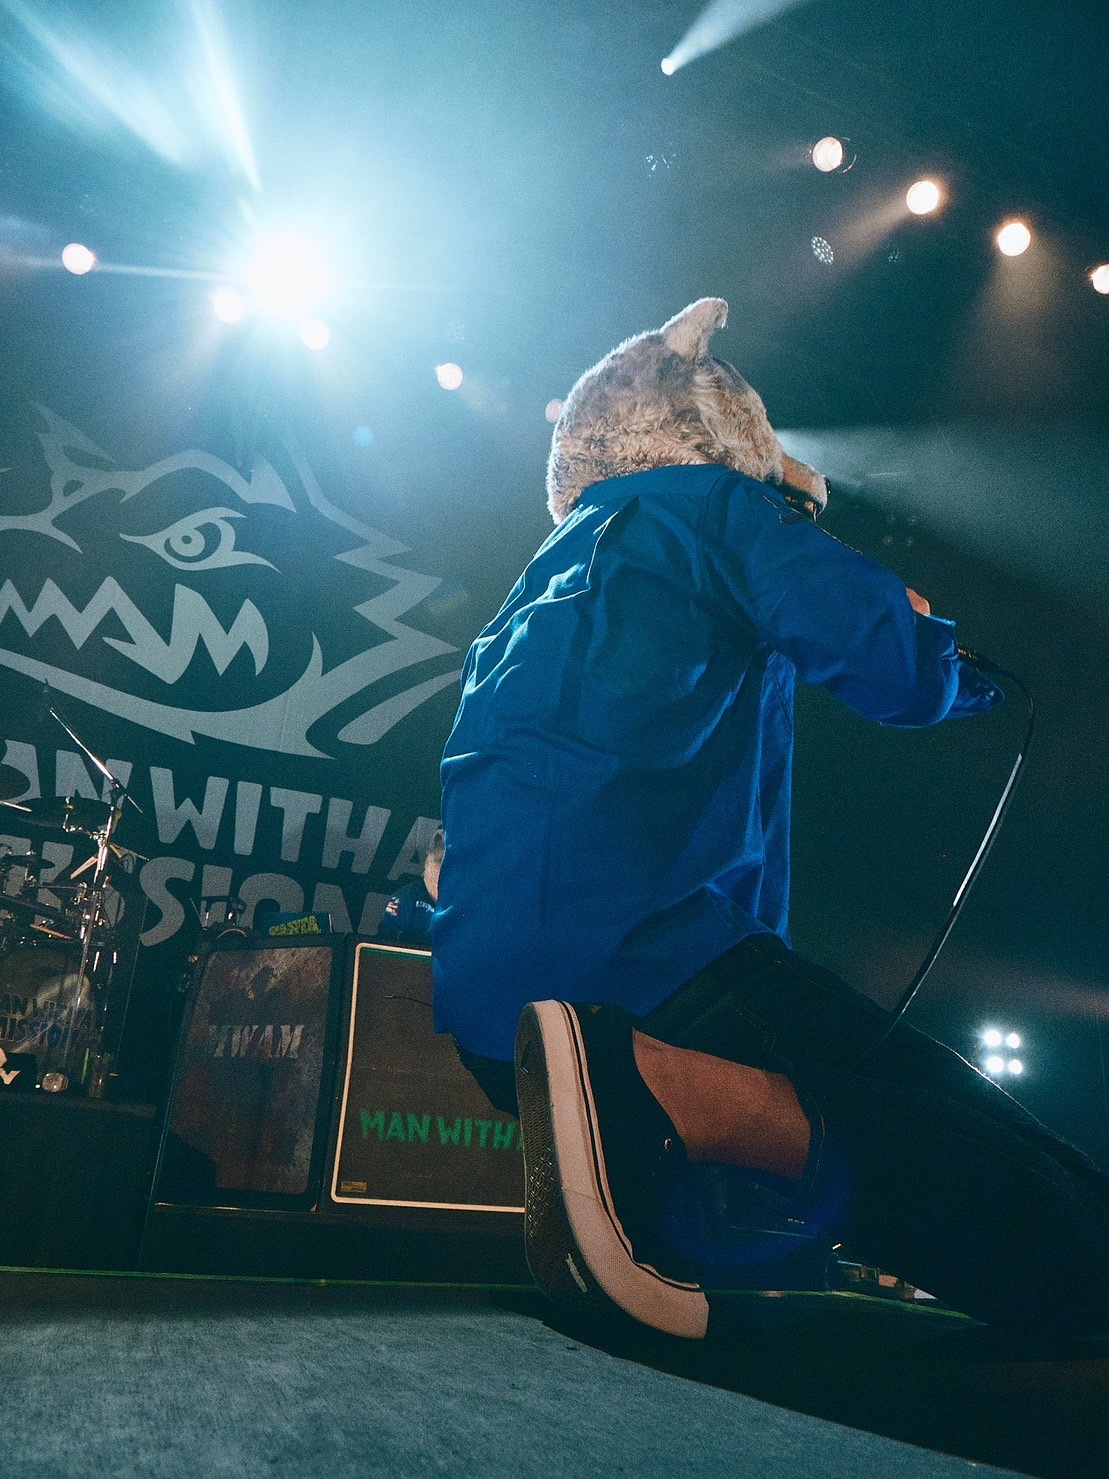  MAN WITH A MISSION